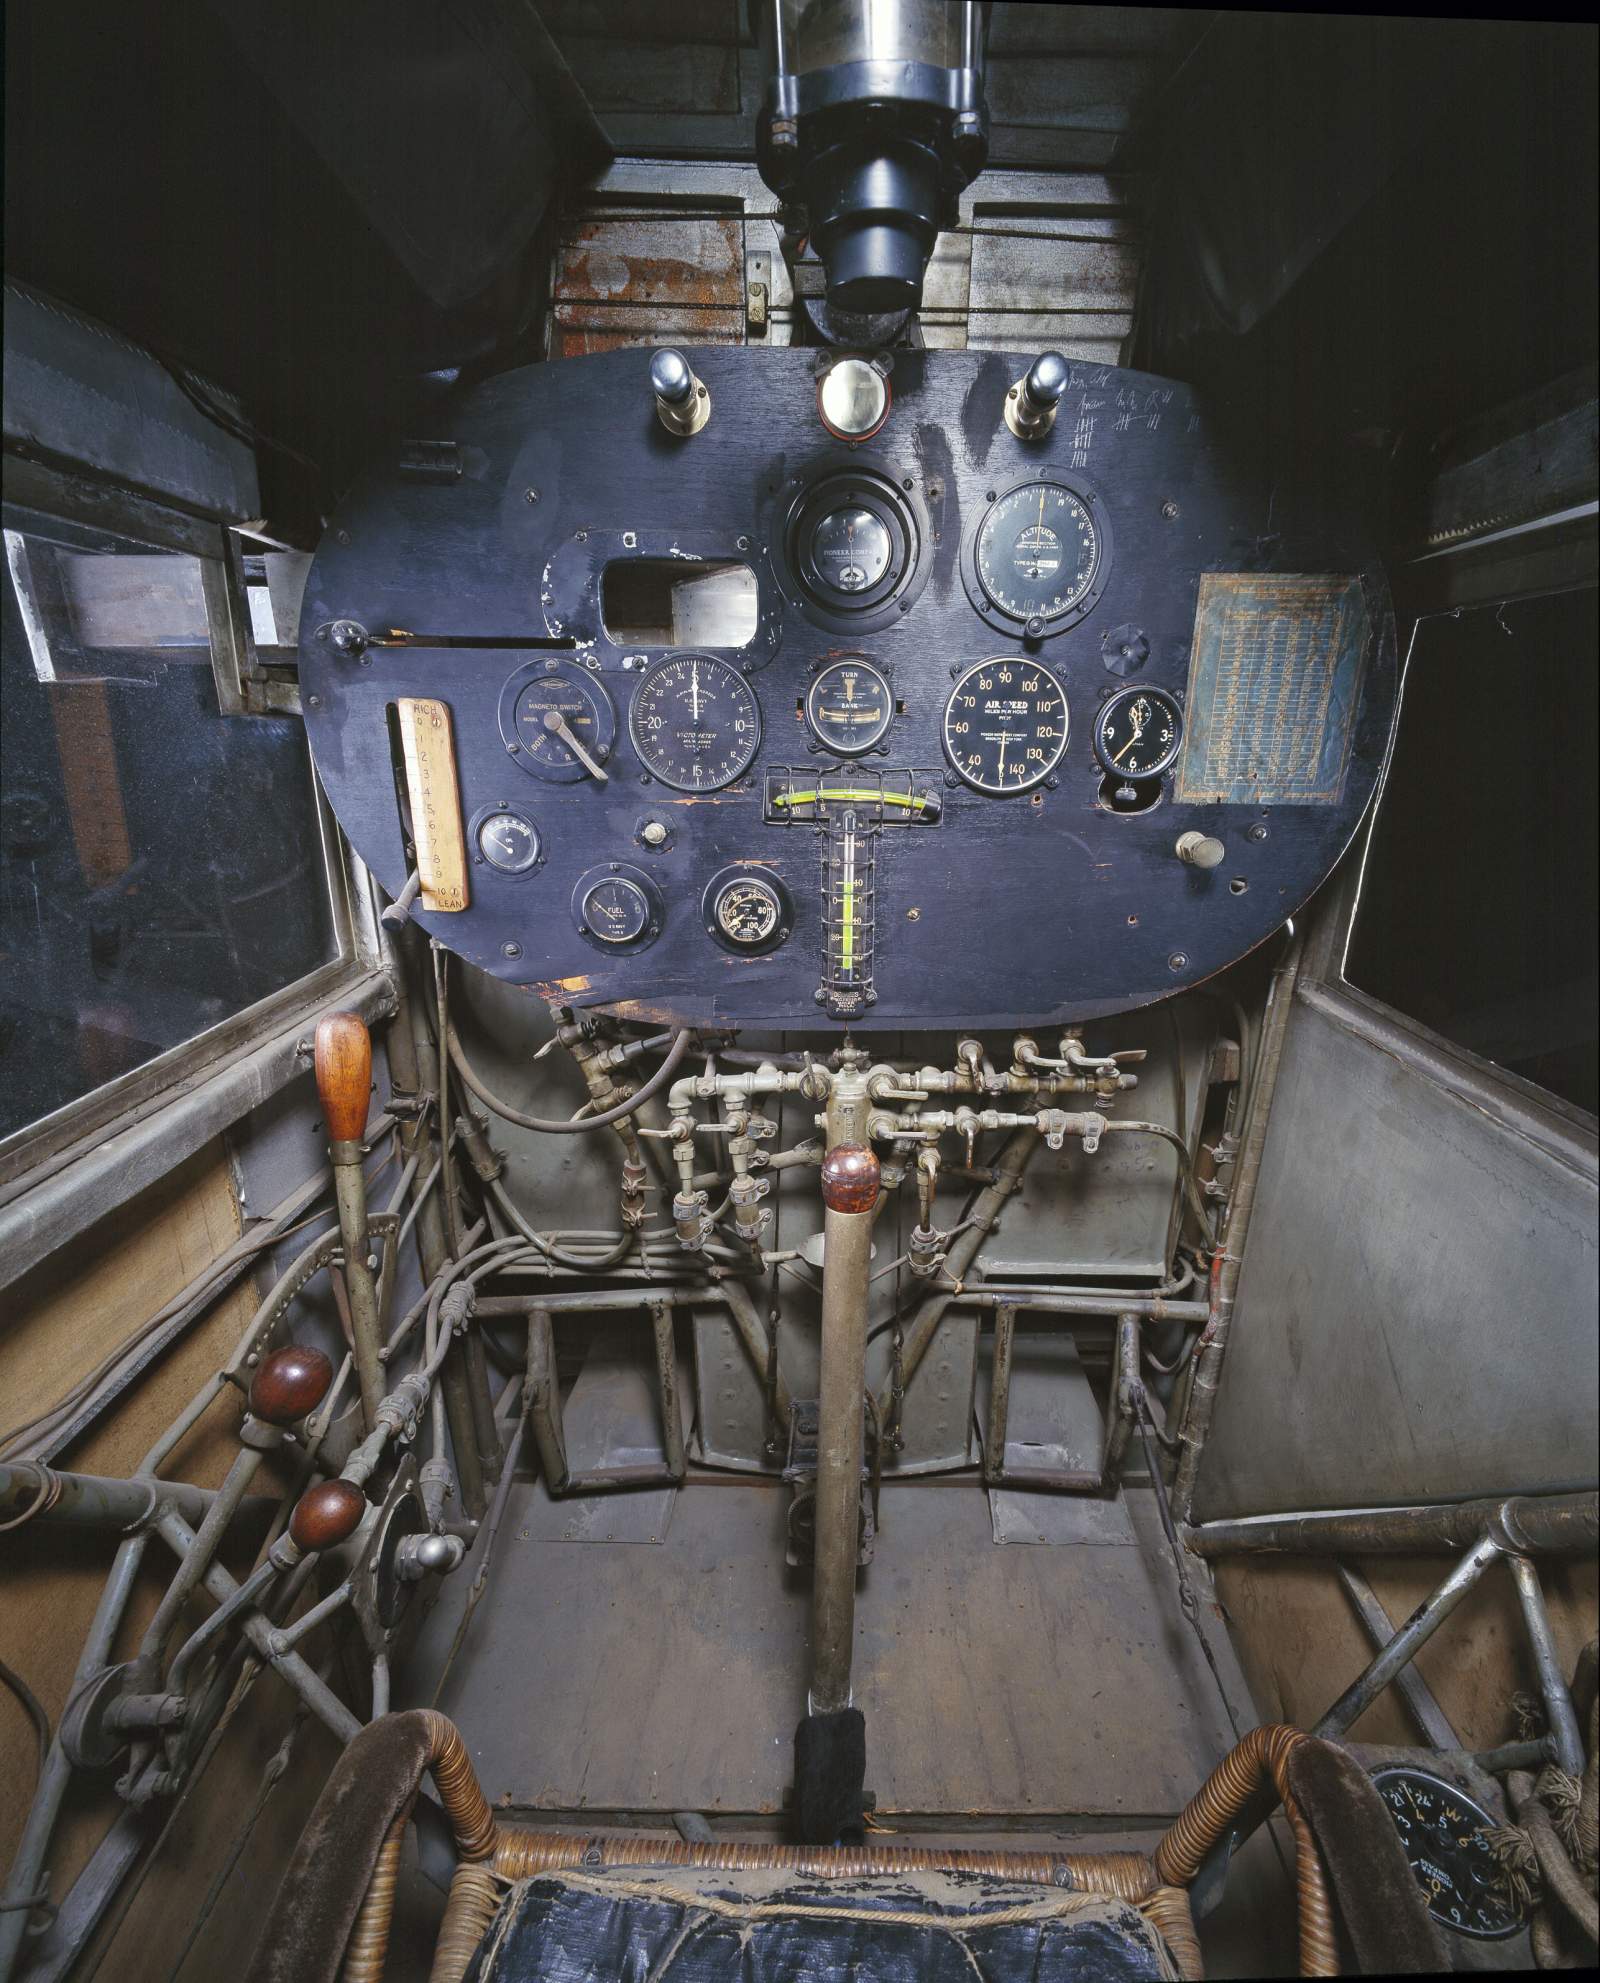 Inside the cockpit of the Spirit of St. Louis